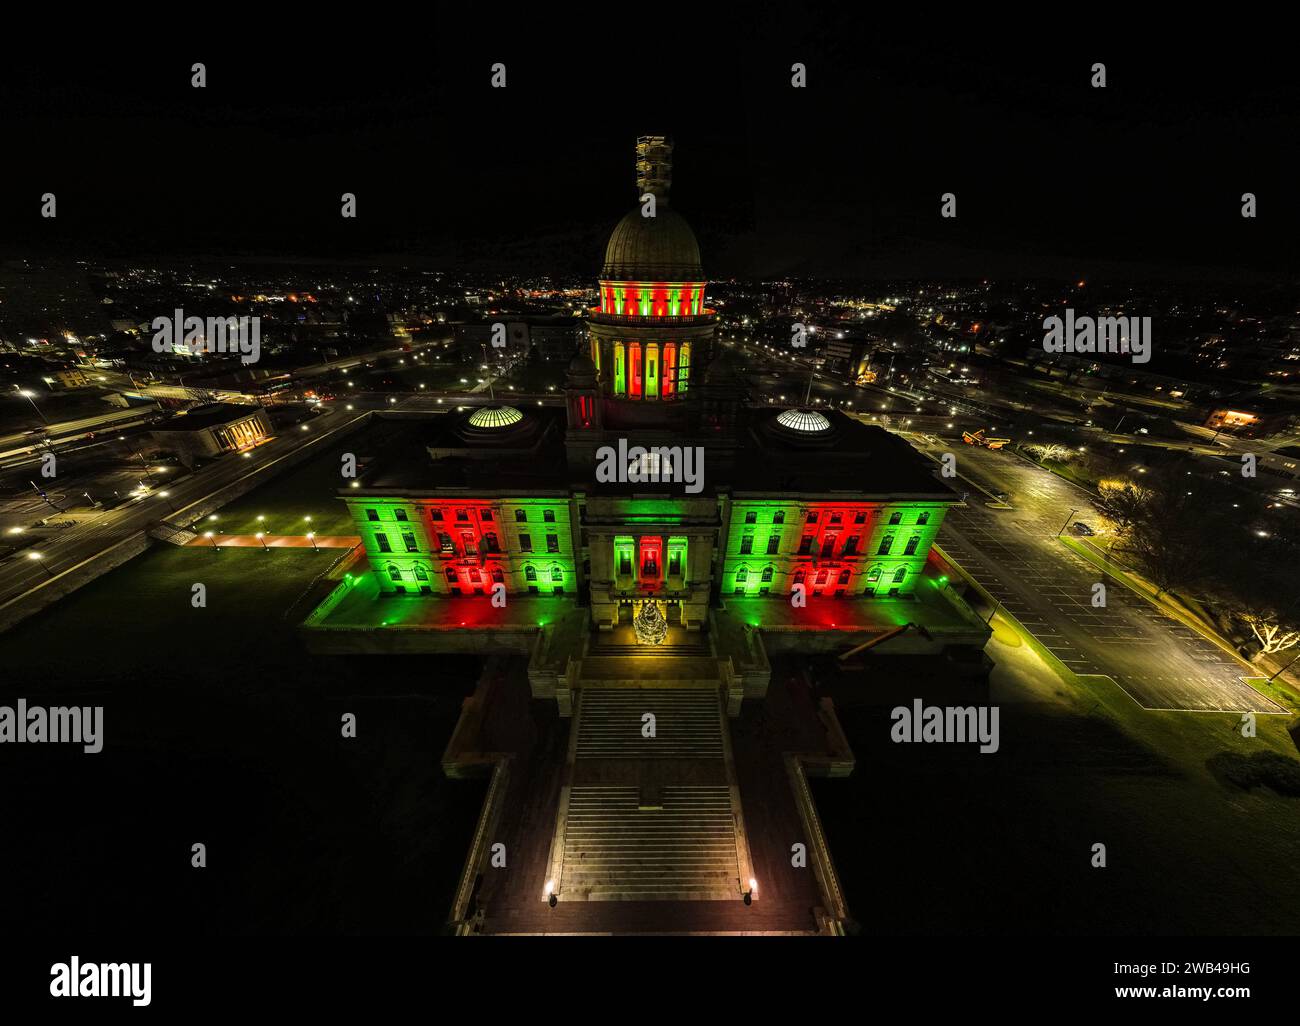 A night shot of a clock tower, illuminated by alternating red and green lights Stock Photo